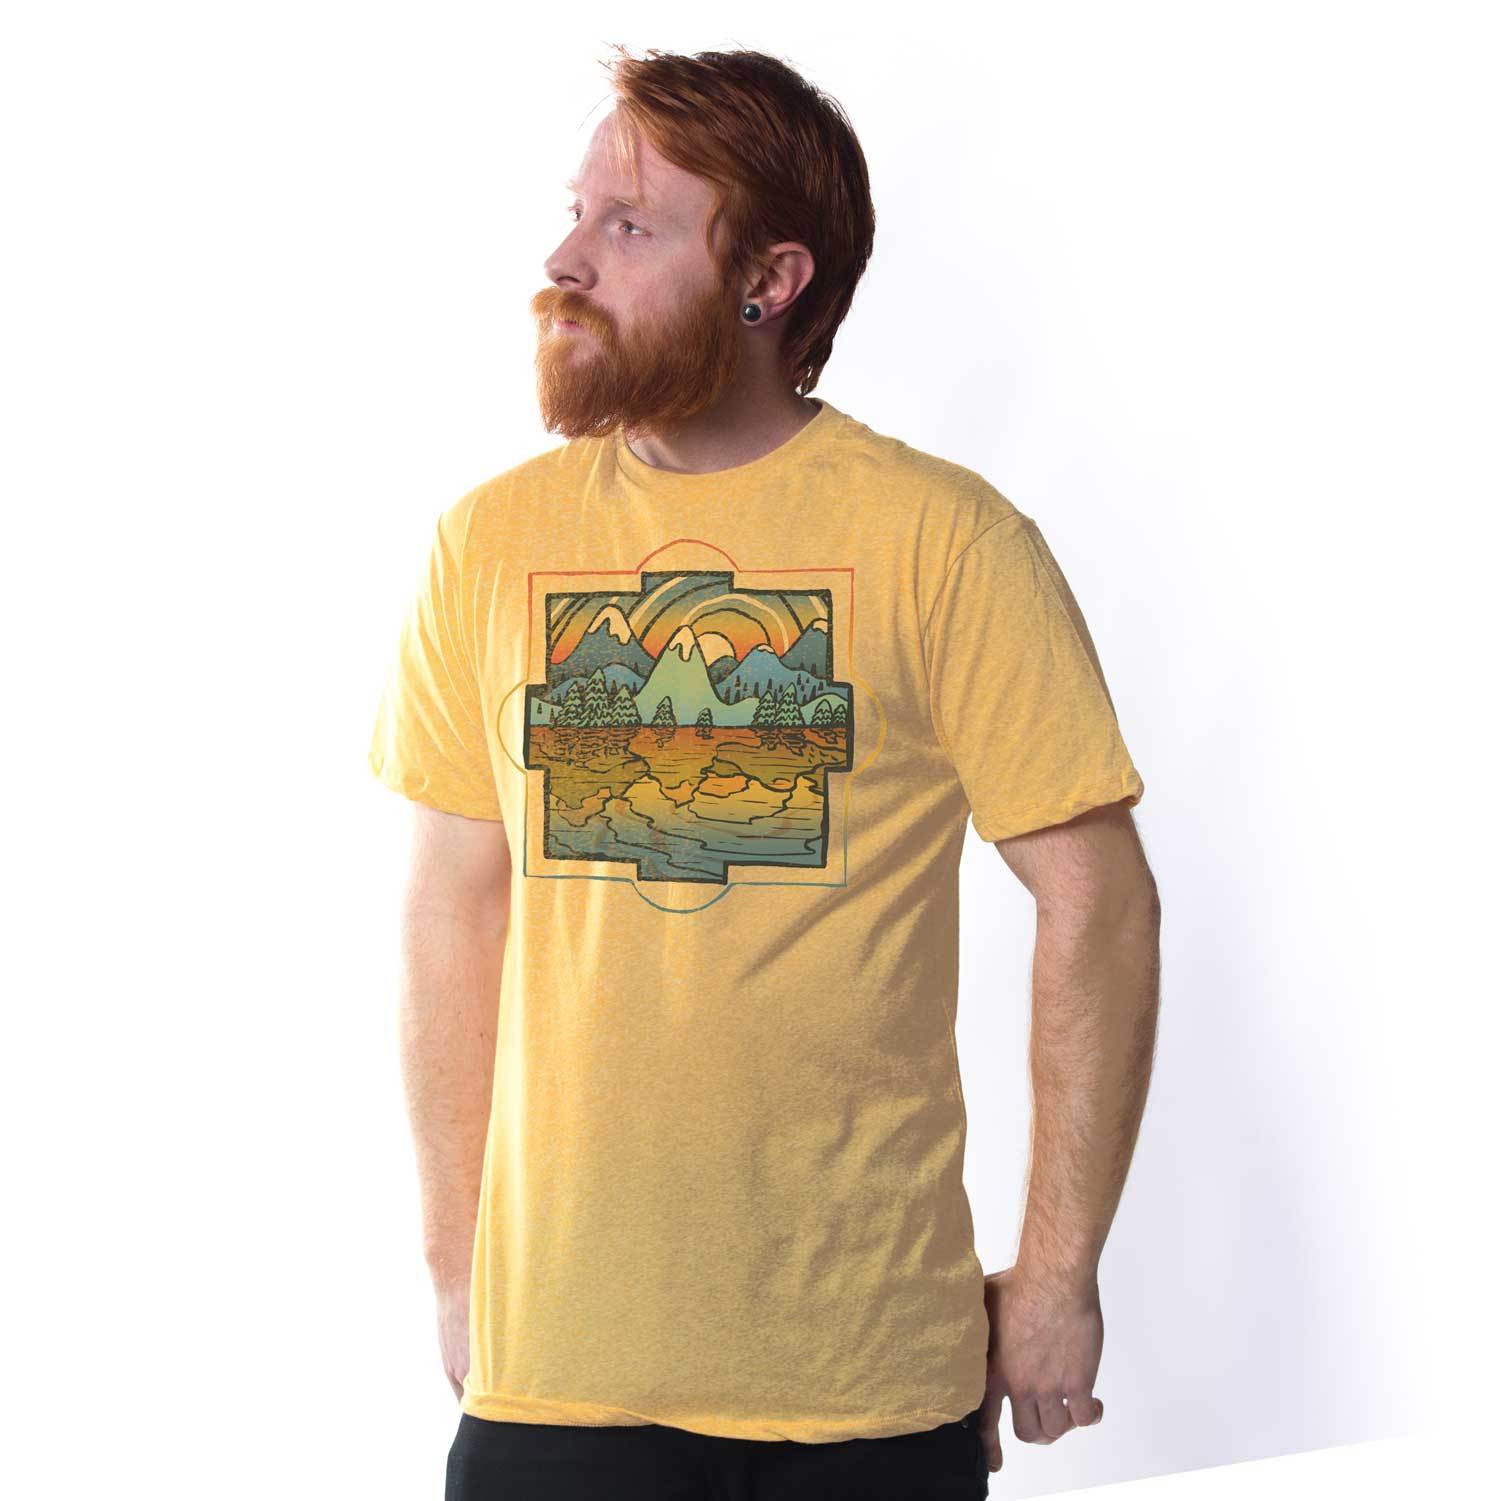 Men's Reflections Colorful Lake Graphic Tee | Vintage Mountains T-Shirt on Model | Solid Threads